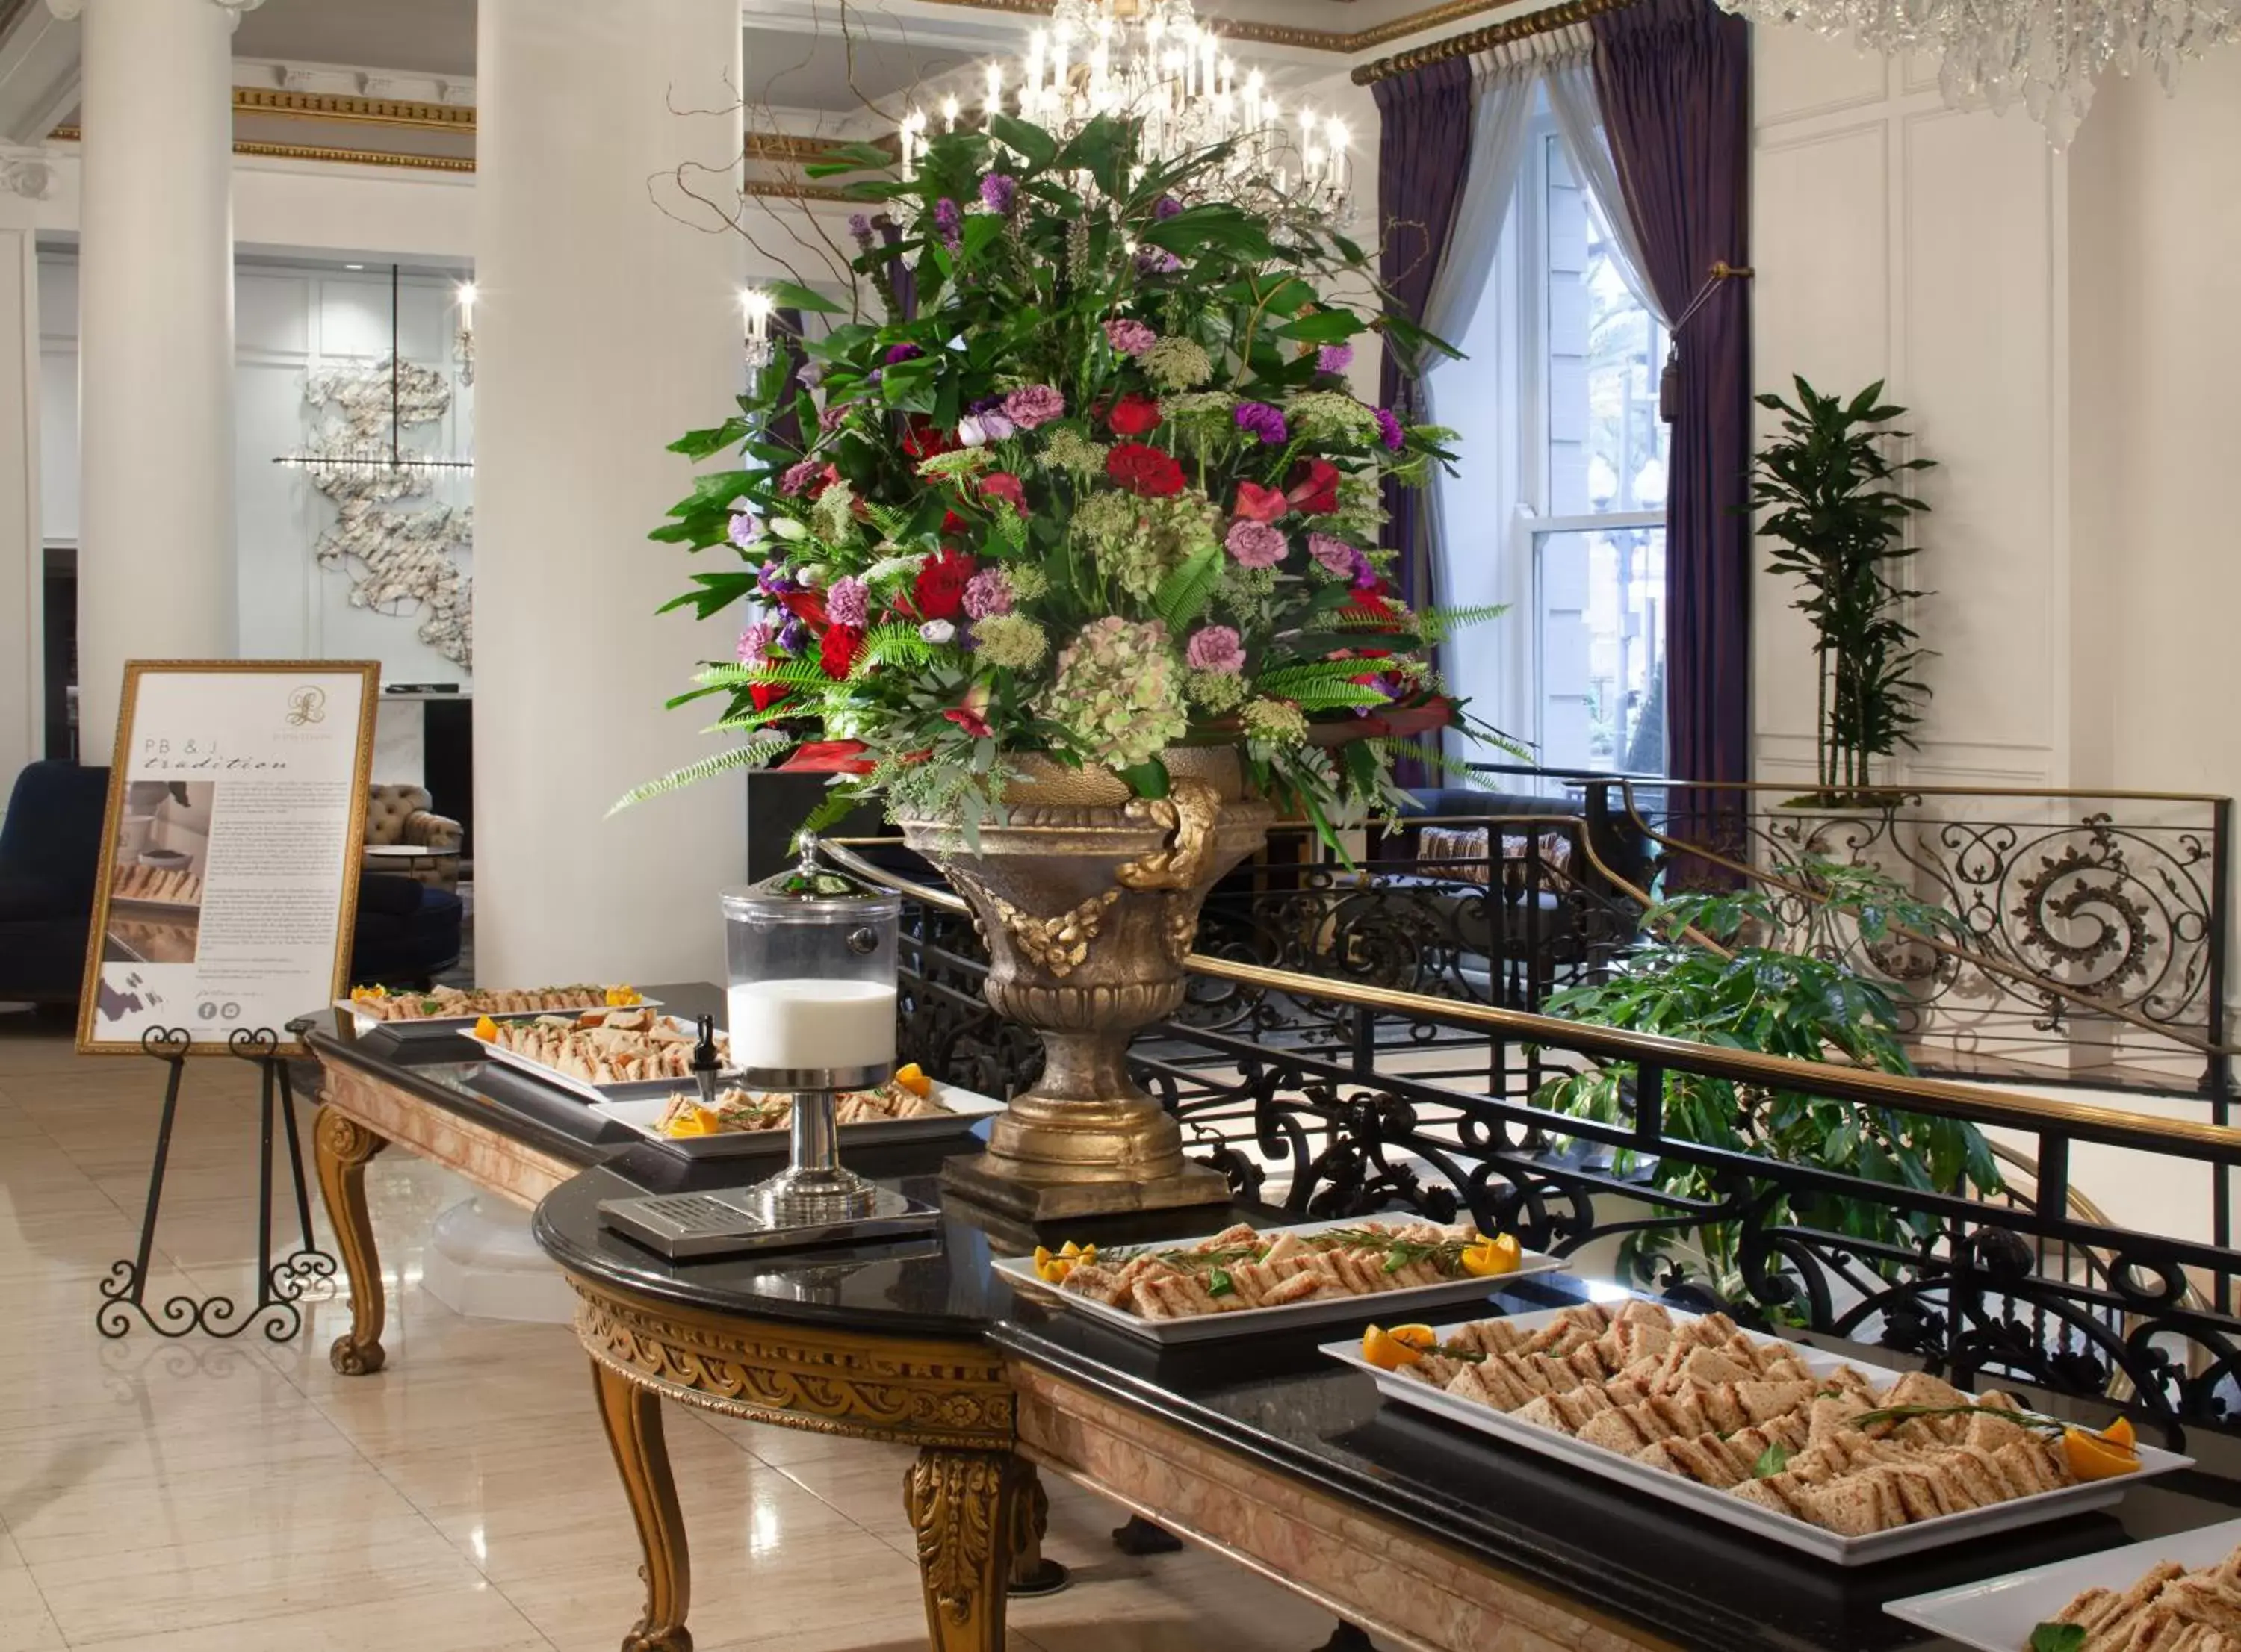 Business facilities in Le Pavillon New Orleans